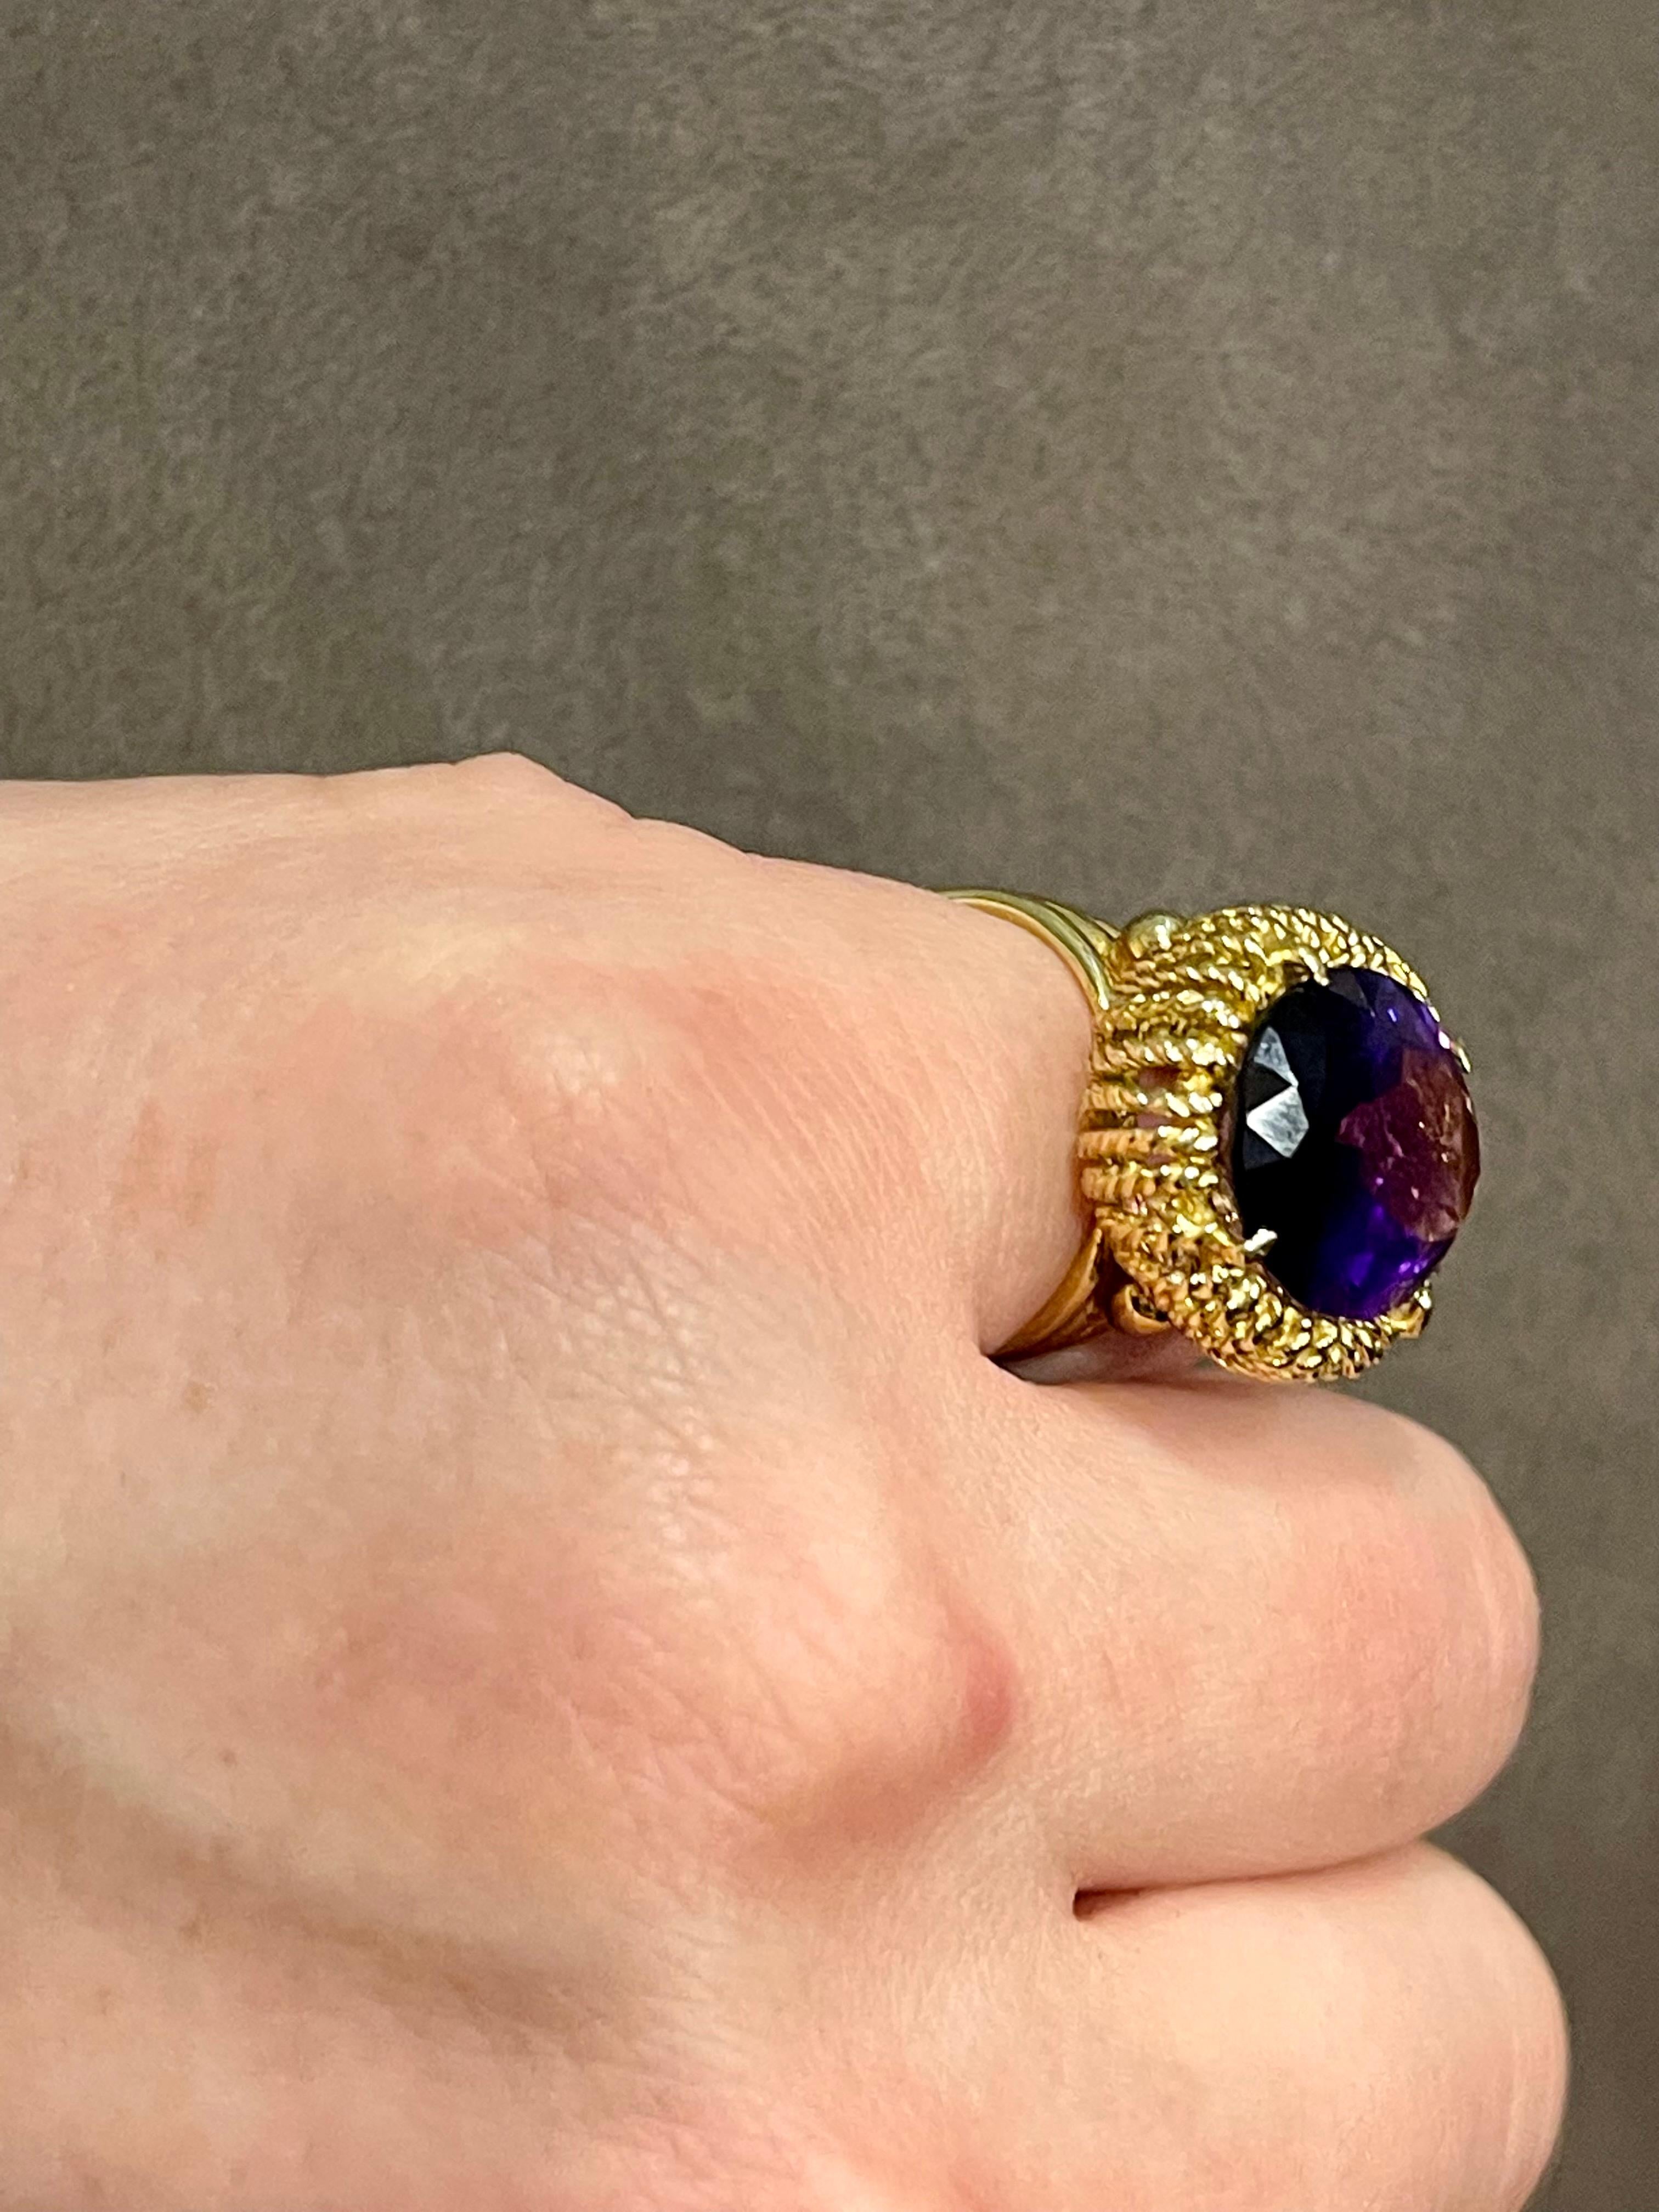 13 Carat Natural Oval Amethyst Cocktail Ring in 18 Karat Yellow Gold, Estate For Sale 8